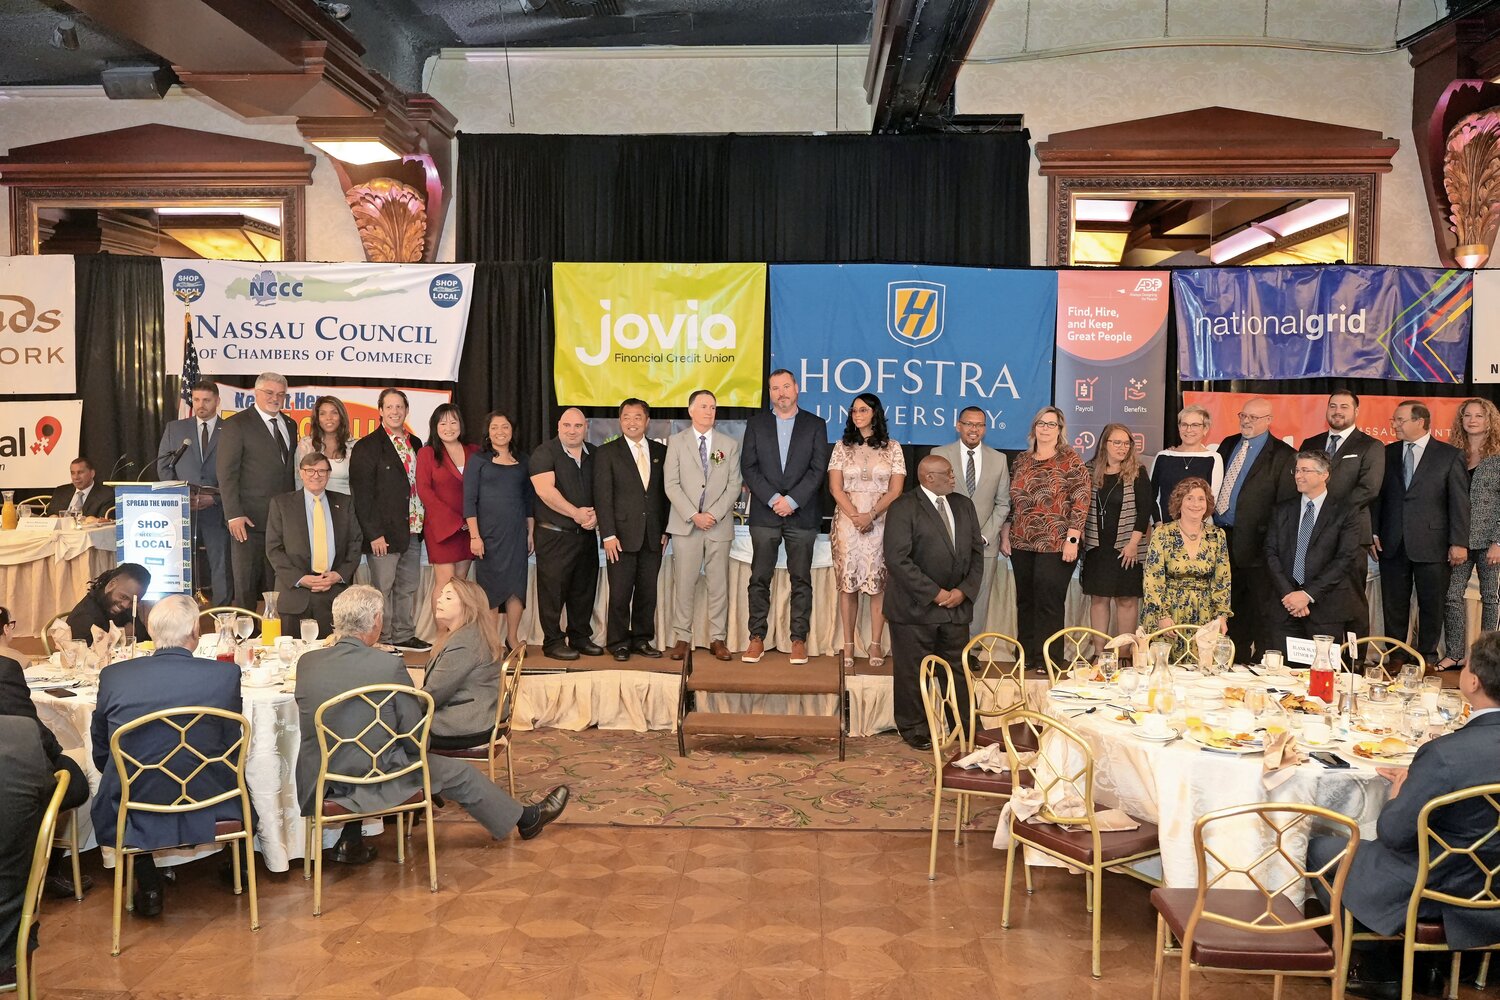 The Nassau Council of Chambers of Commerce honored more than 40 people and businesses as the tops in their fields — both for entrepreneurial spirit and giving back to their community — during a recent breakfast at Crest Hollow Country Club. They include Paul and Roberta Danziger from Stitch This Print That (Bellmore), Anthony Bott (East Meadow), Dana McDowell (Elmont), Jaime Parra (Franklin Square), Jerry Farrell (Glen Cove), Sally Barrera (Hempstead), Joshua Siegel (Long Beach), Atlantic Hardware (Freeport), and William Powell (Levittown).